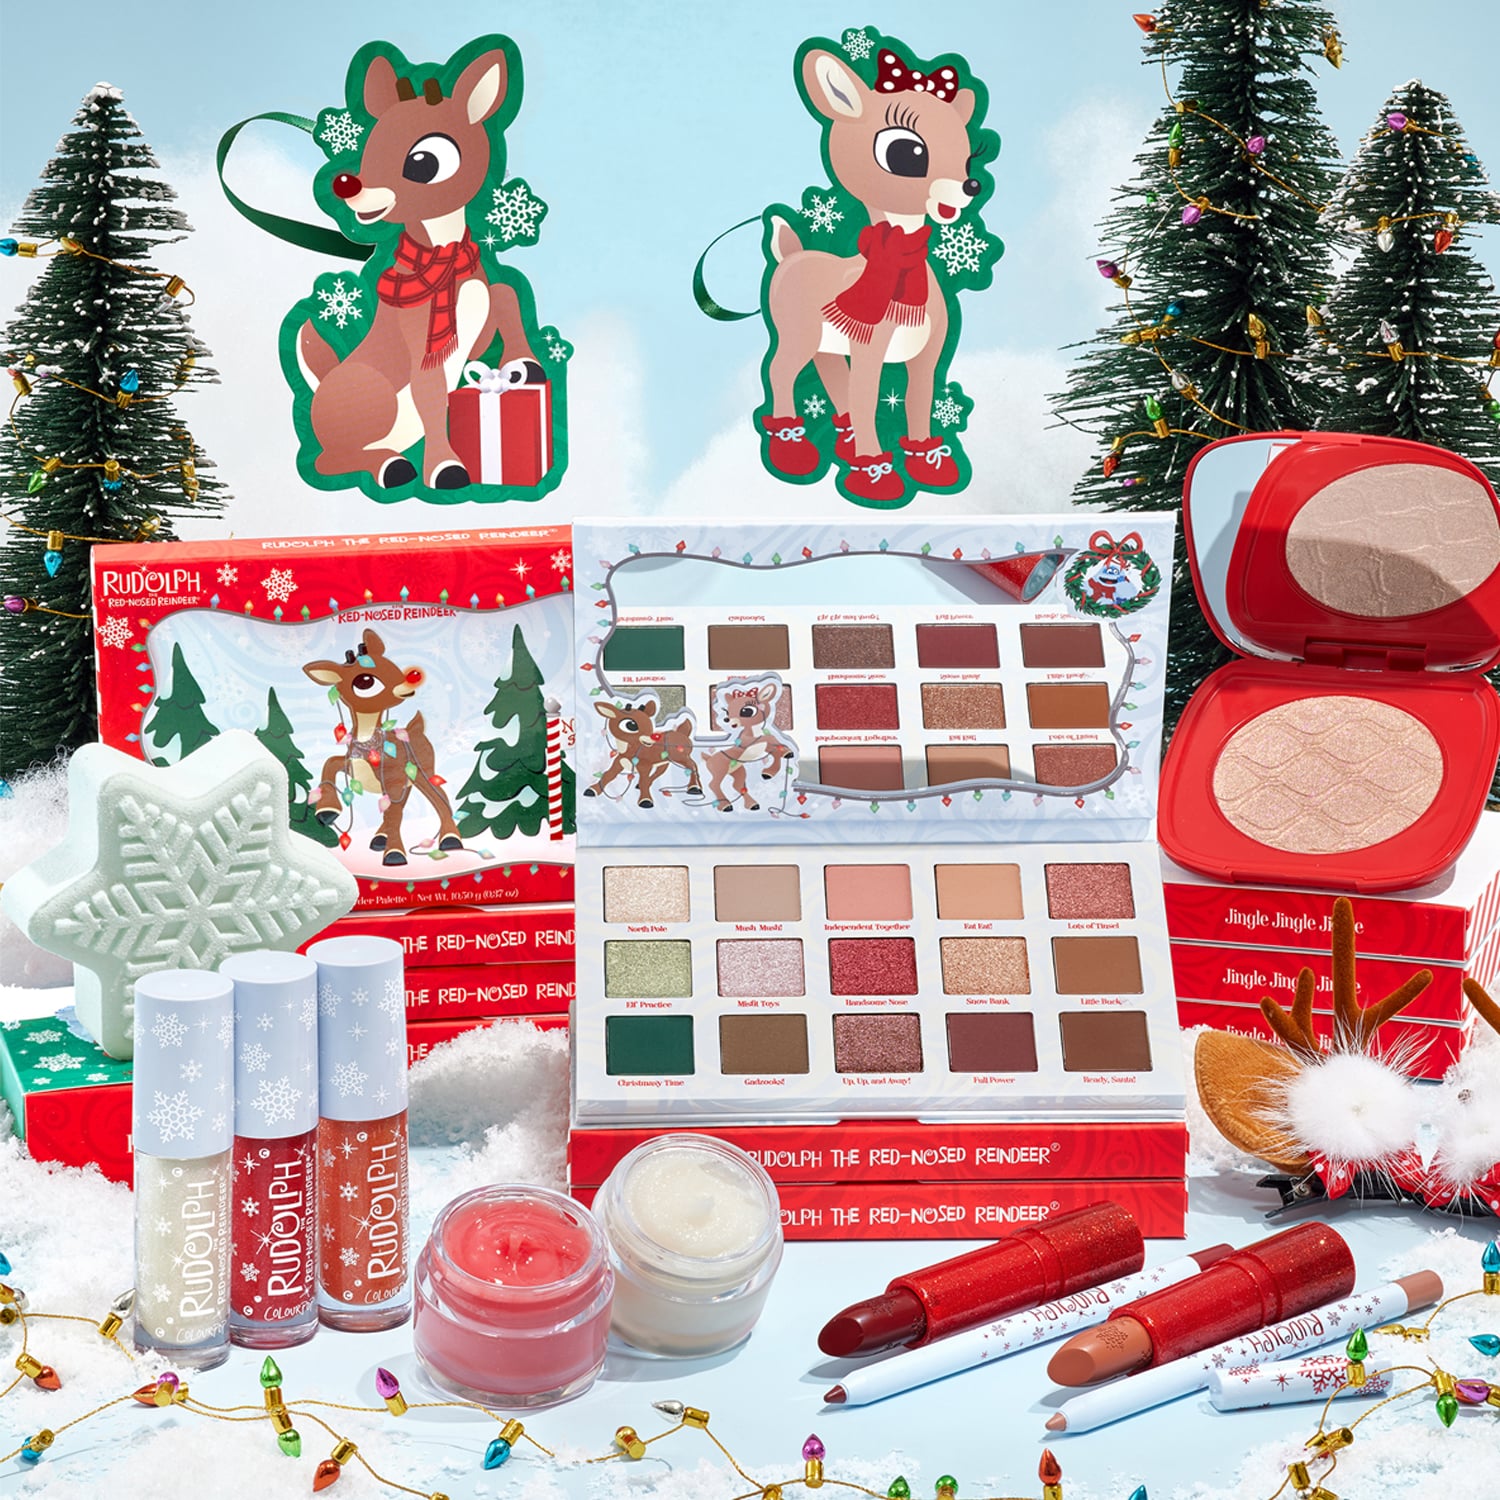 ColourPop Holiday Collection Makeup Palette 2018